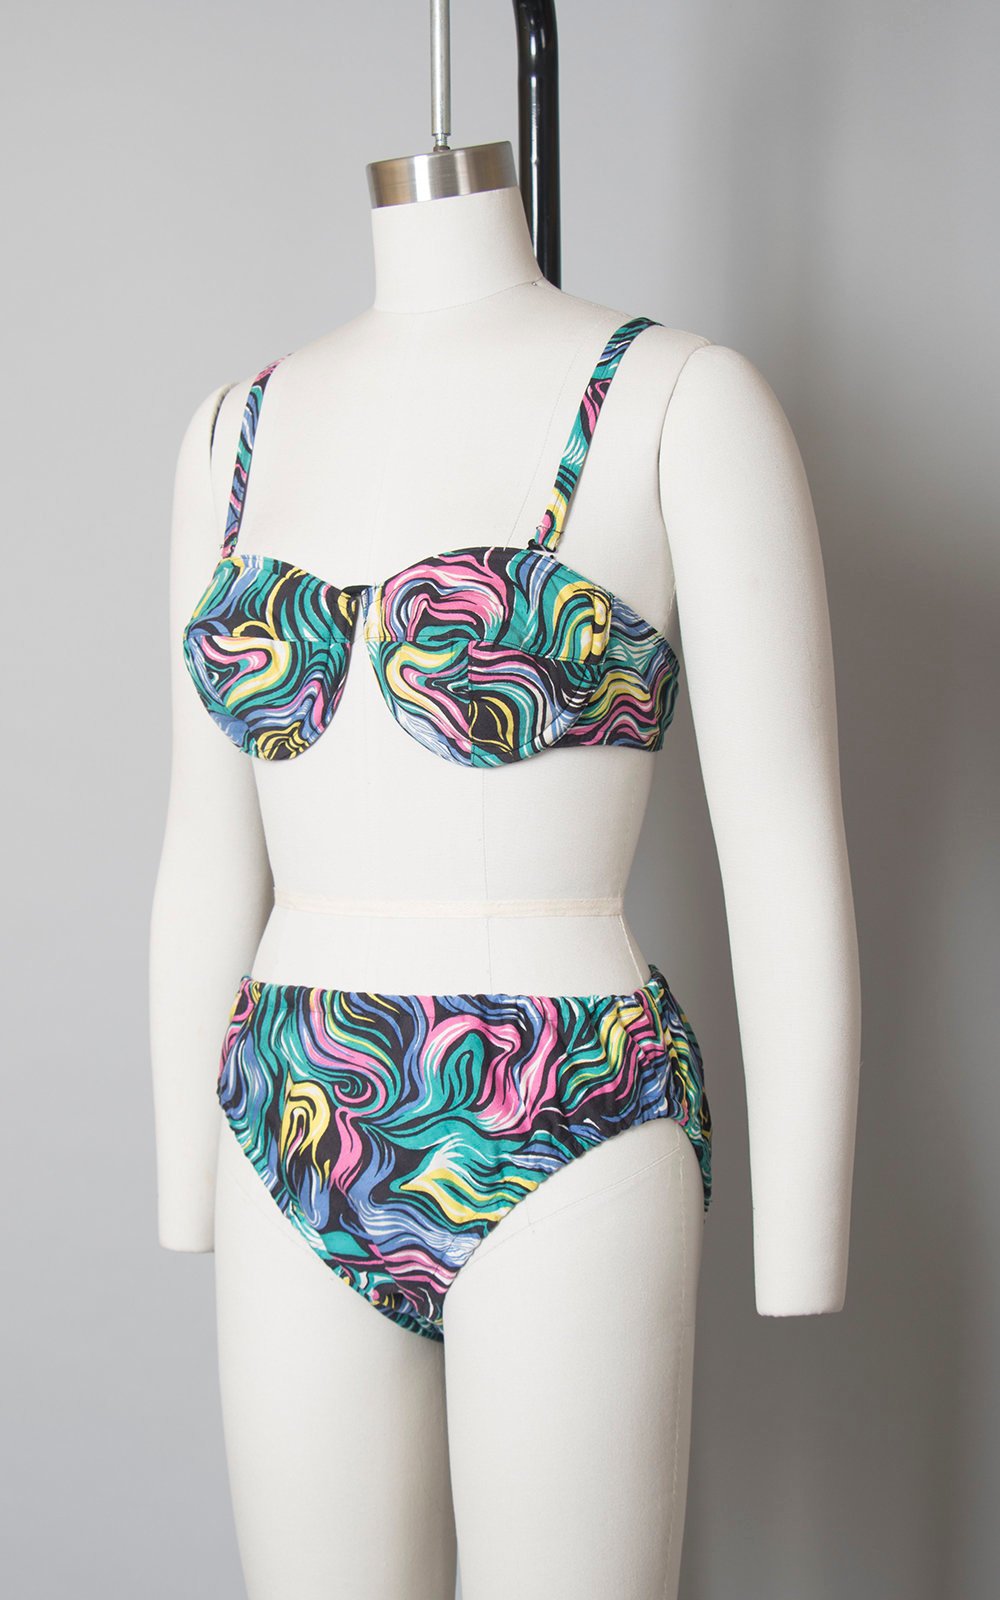 Vintage 1950s Bikini | 50s Psychedelic Swirl Printed Swimsuit Strapless Underwire Bra Low Rise Bathing Suit (small/medium)